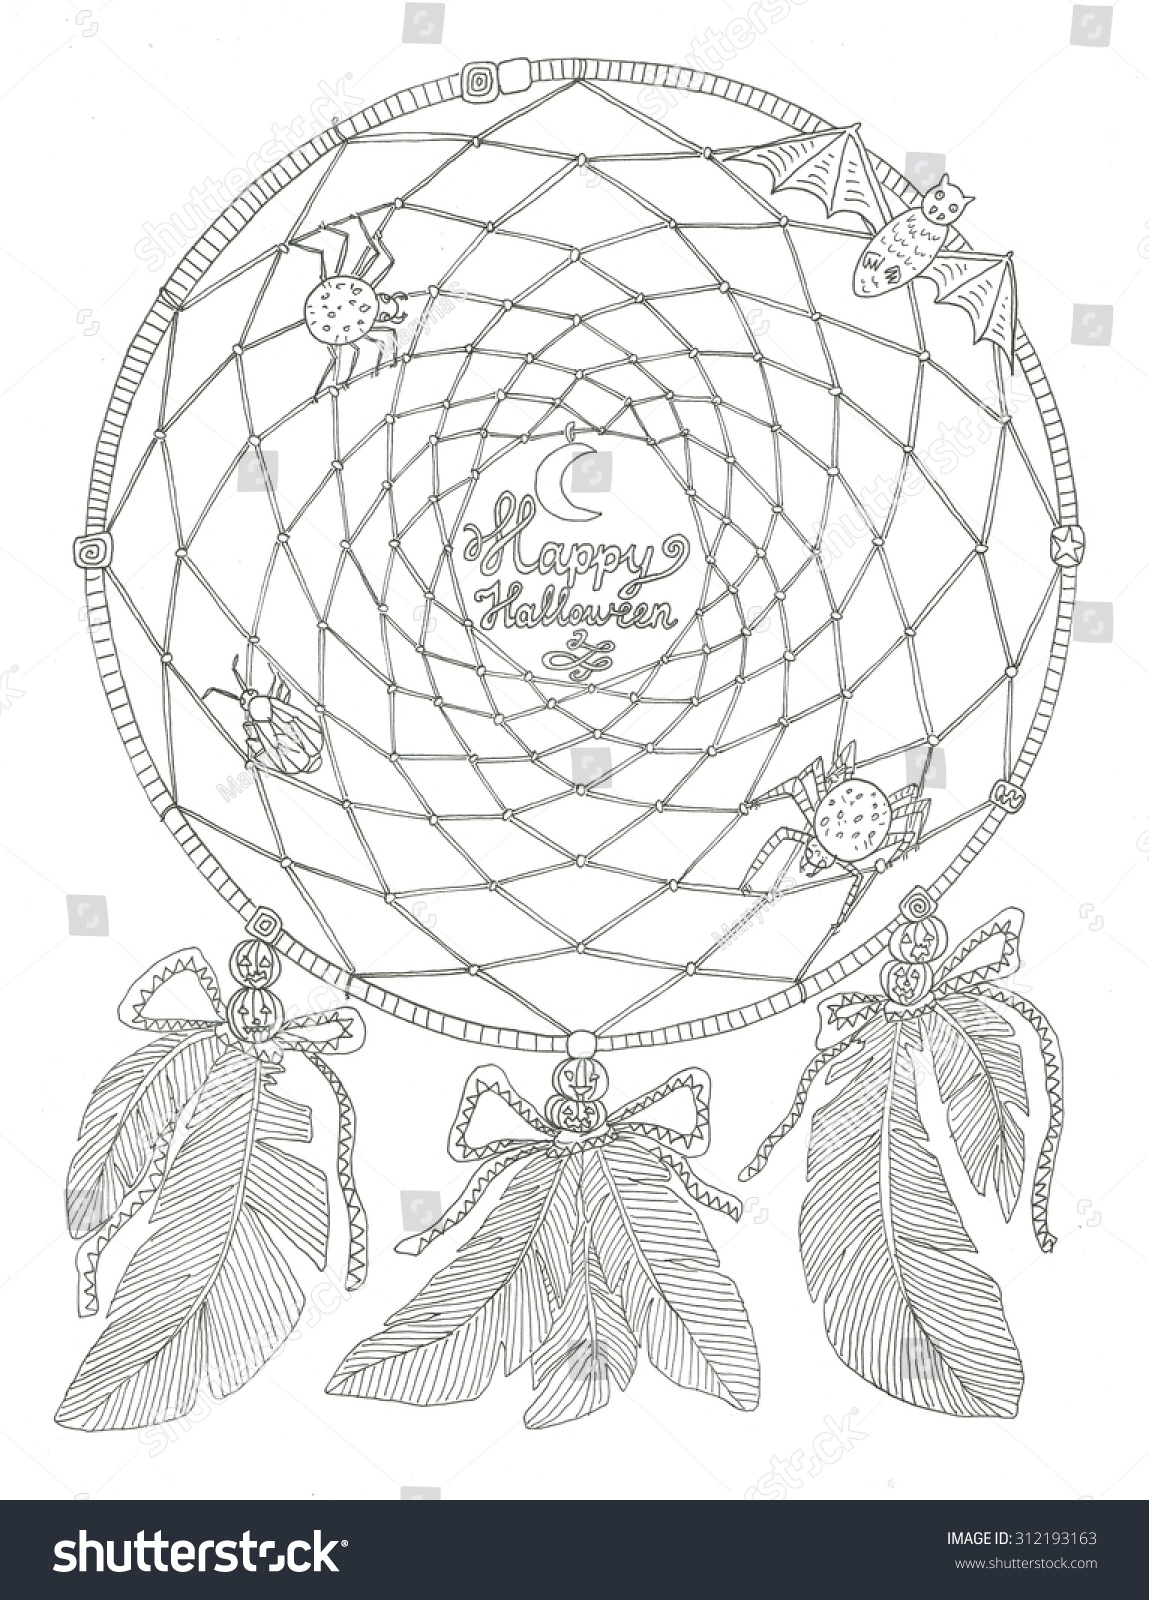 Halloween dream catcher coloring page